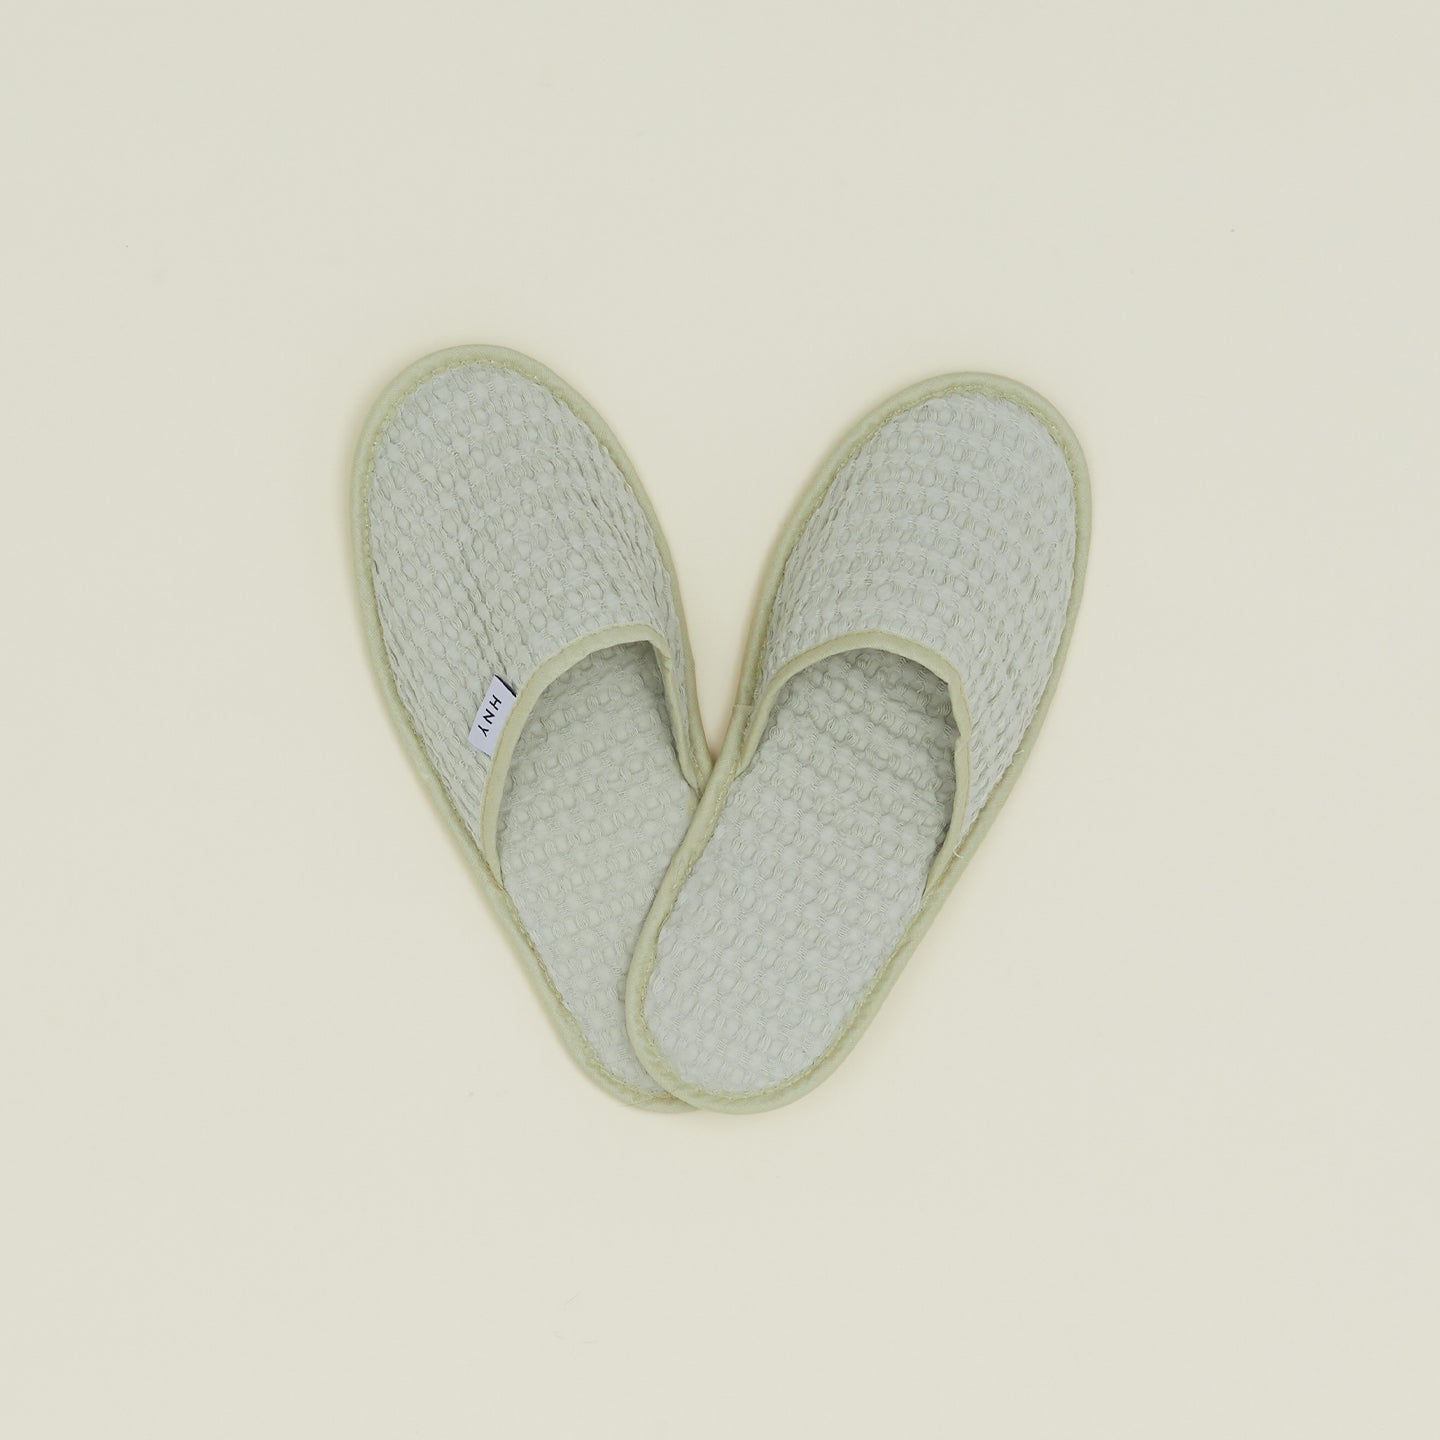 Simple Waffle Slippers - Sage